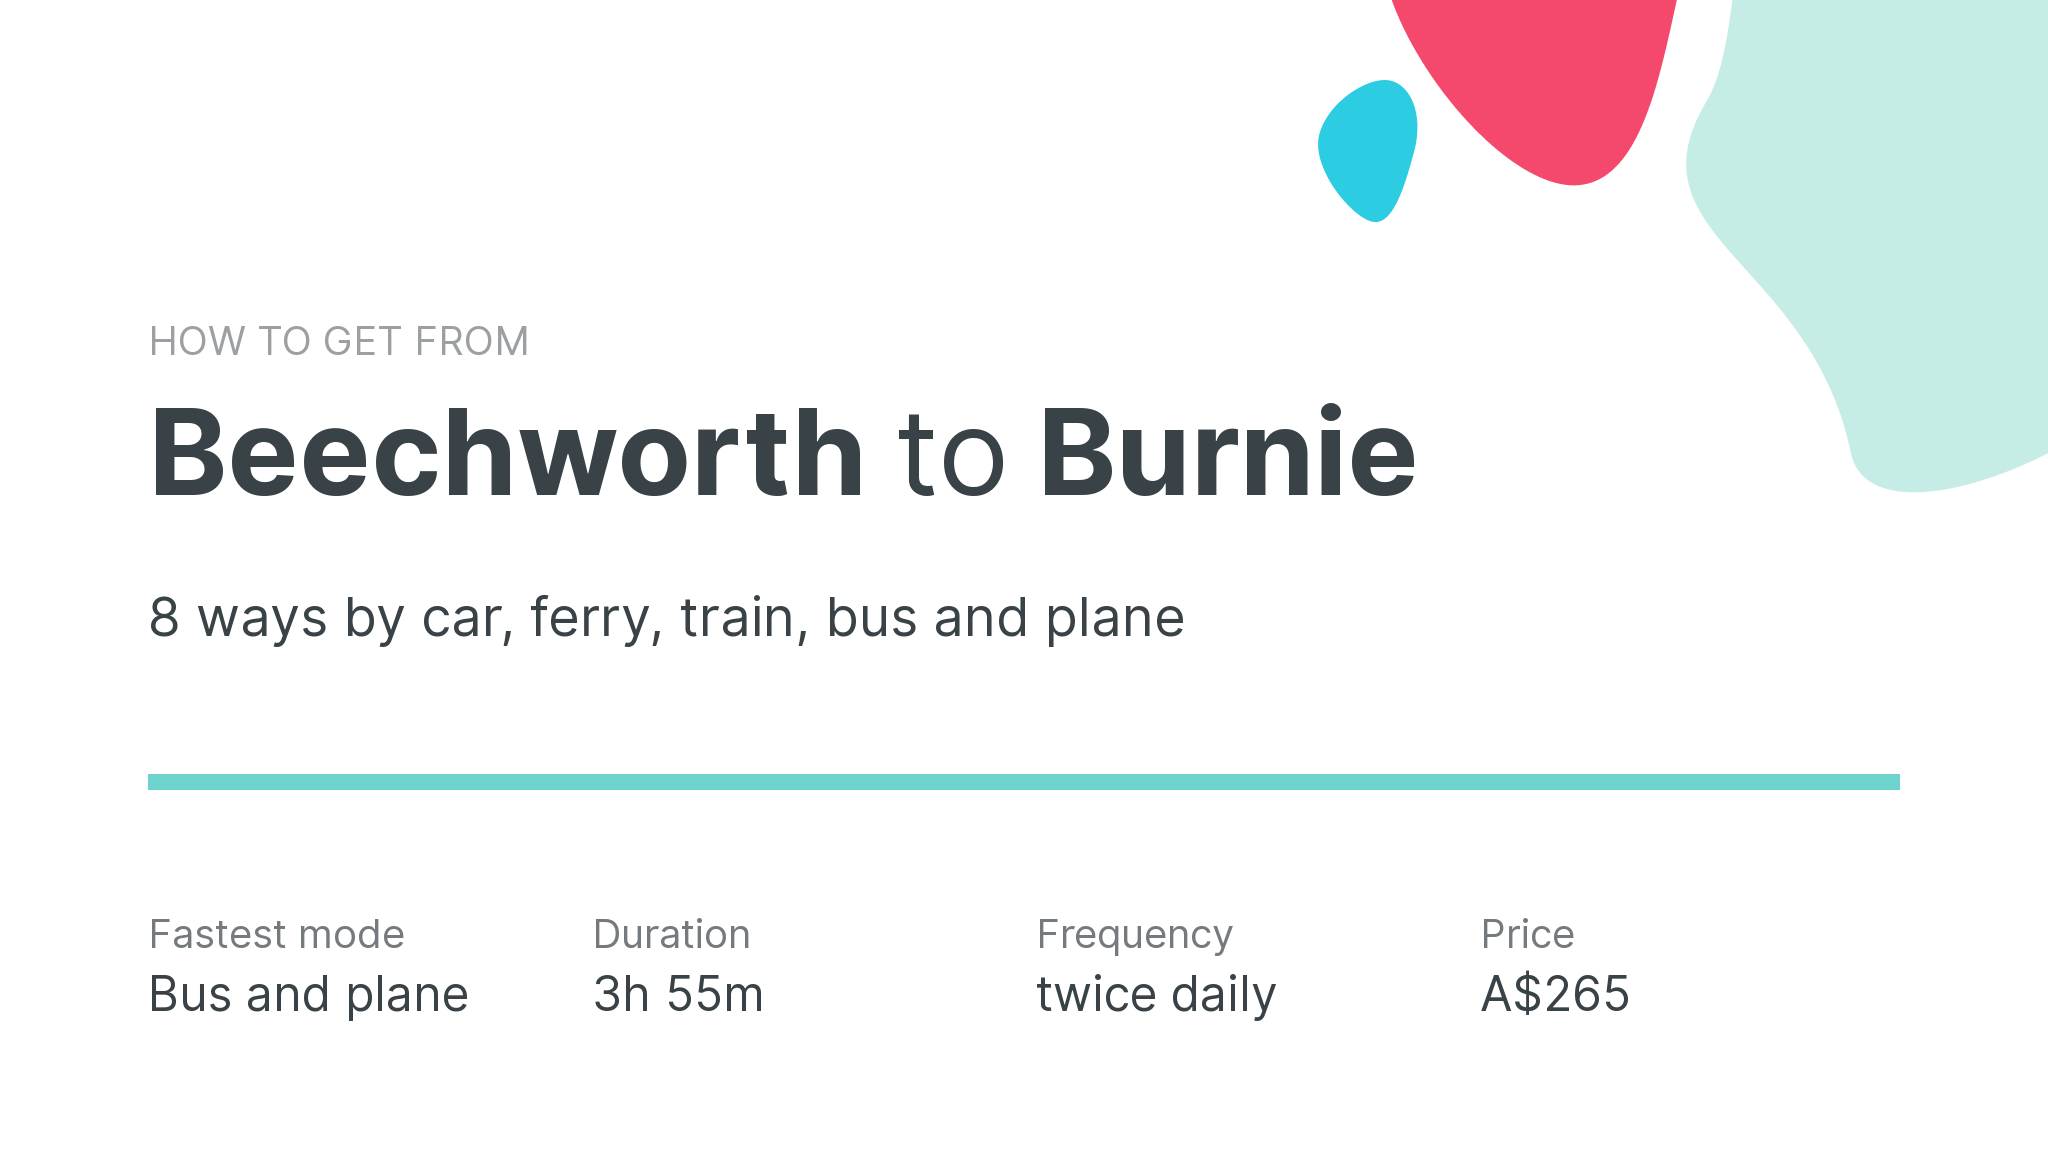 How do I get from Beechworth to Burnie